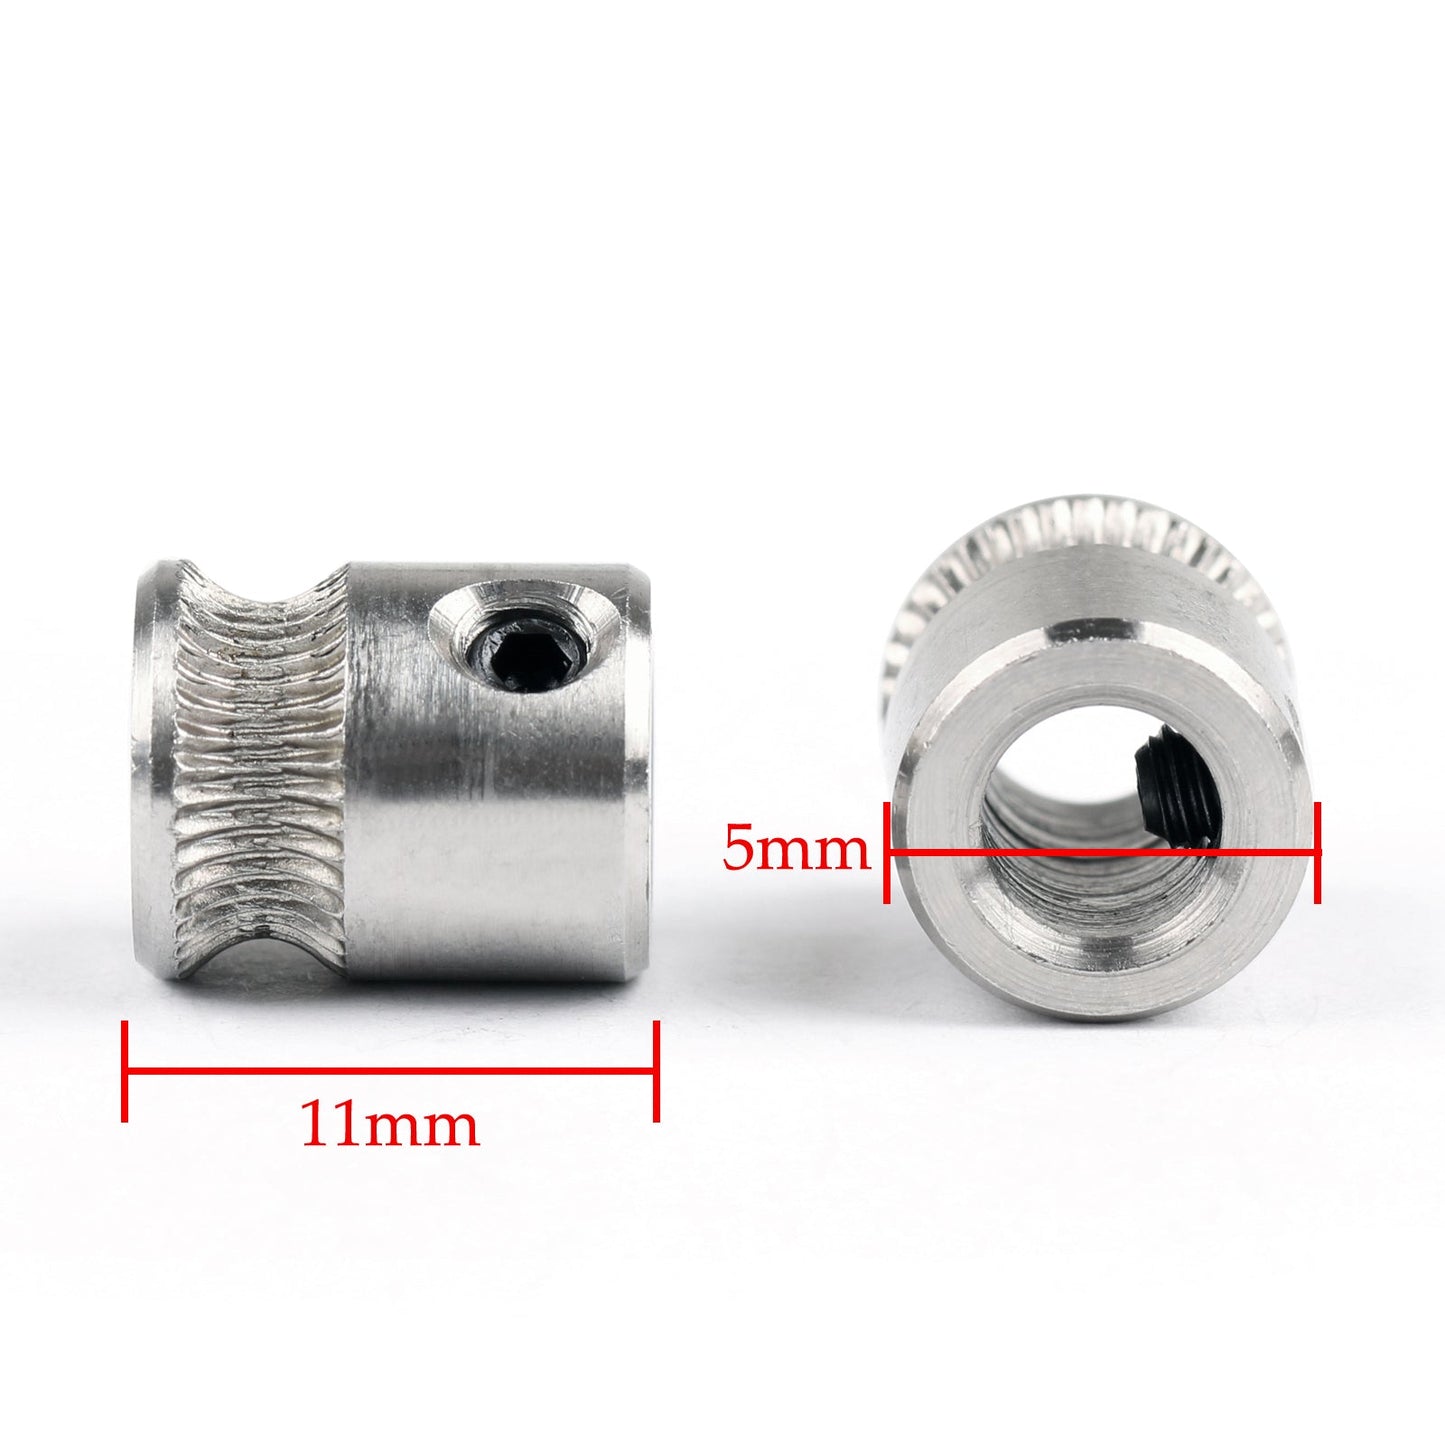 2x MK8 Steel Drive Gear Filament Pulley For 1.75/3.0mm Extruder 3D Printer